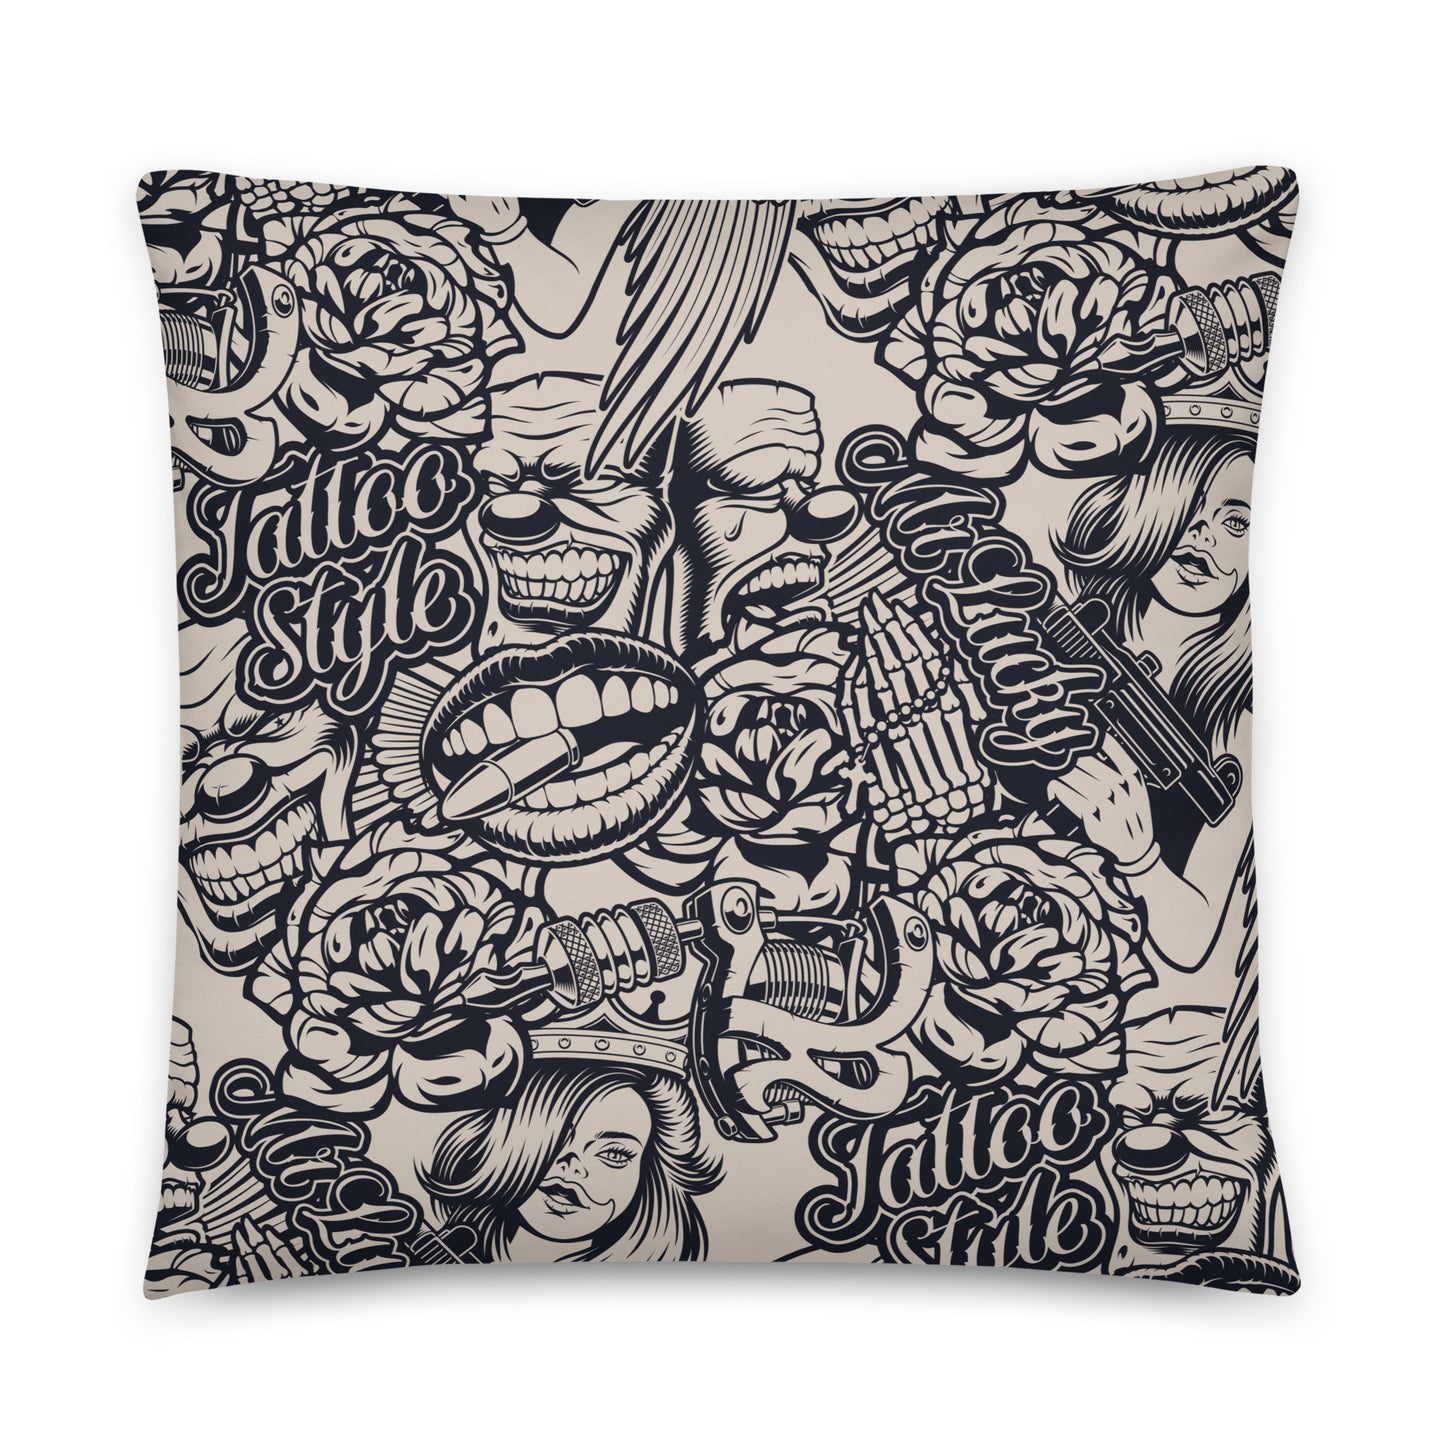 Tattoo Style - Sustainably Made Pillows